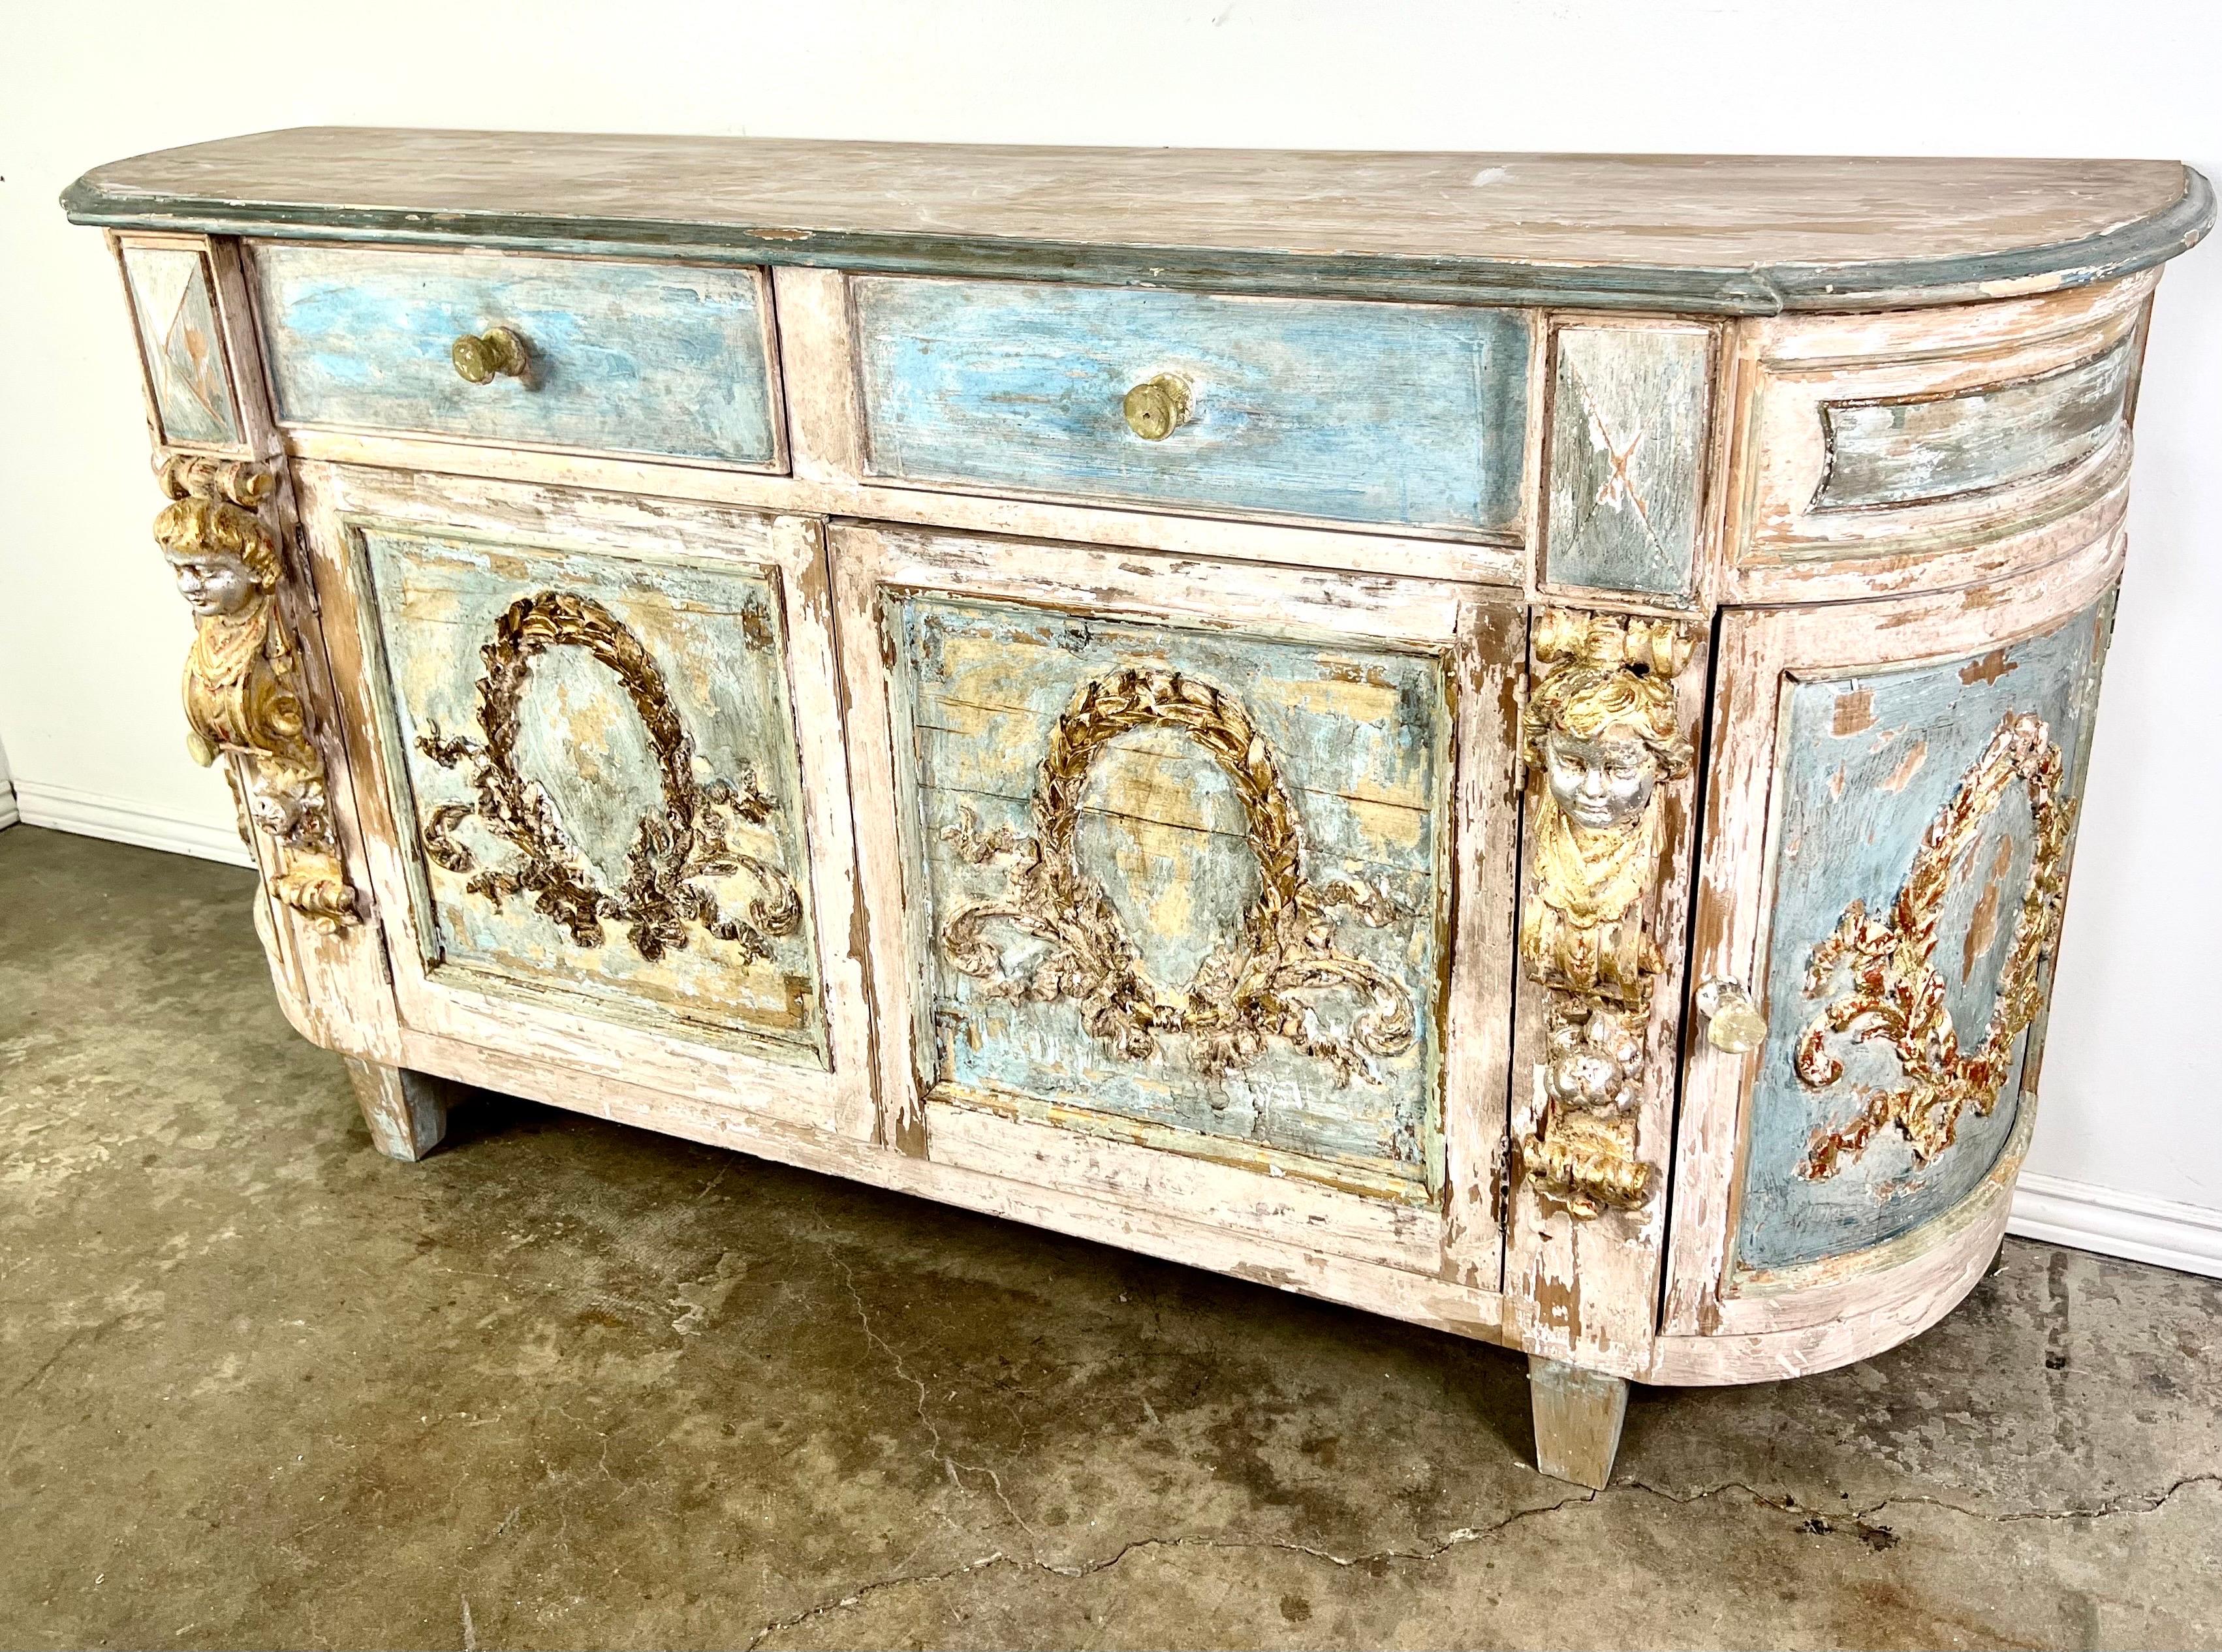 An Italian Neoclassical style painted credenza featuring carved giltwood wreaths and cherubs, along with four doors and two drawers for plenty of storage space.  This piece reflects the opulence and artistic detailing characteristic of that period. 